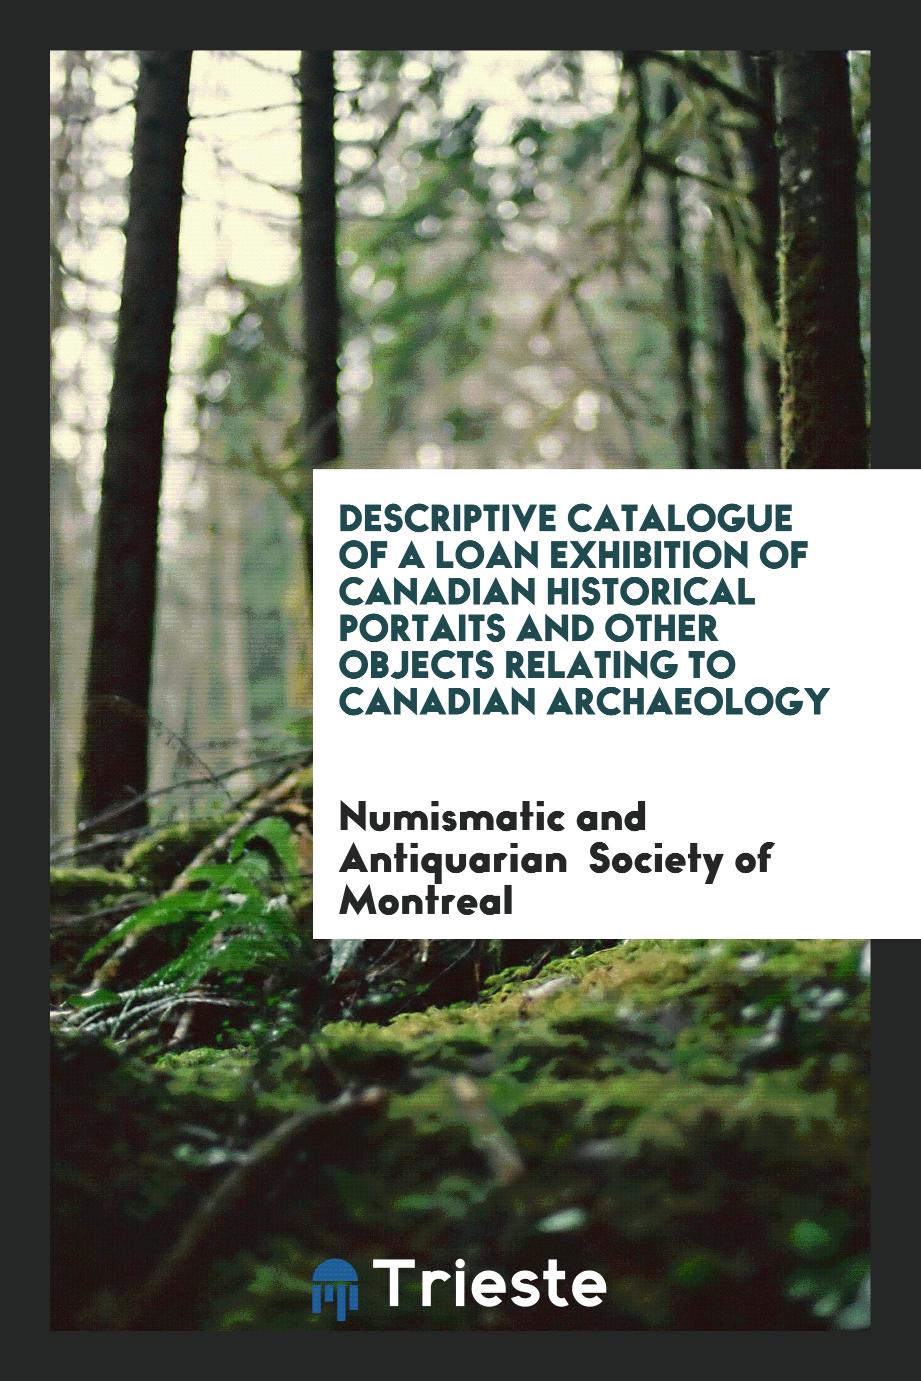 Descriptive Catalogue of a Loan Exhibition of Canadian Historical Portaits and other objects relating to Canadian archaeology